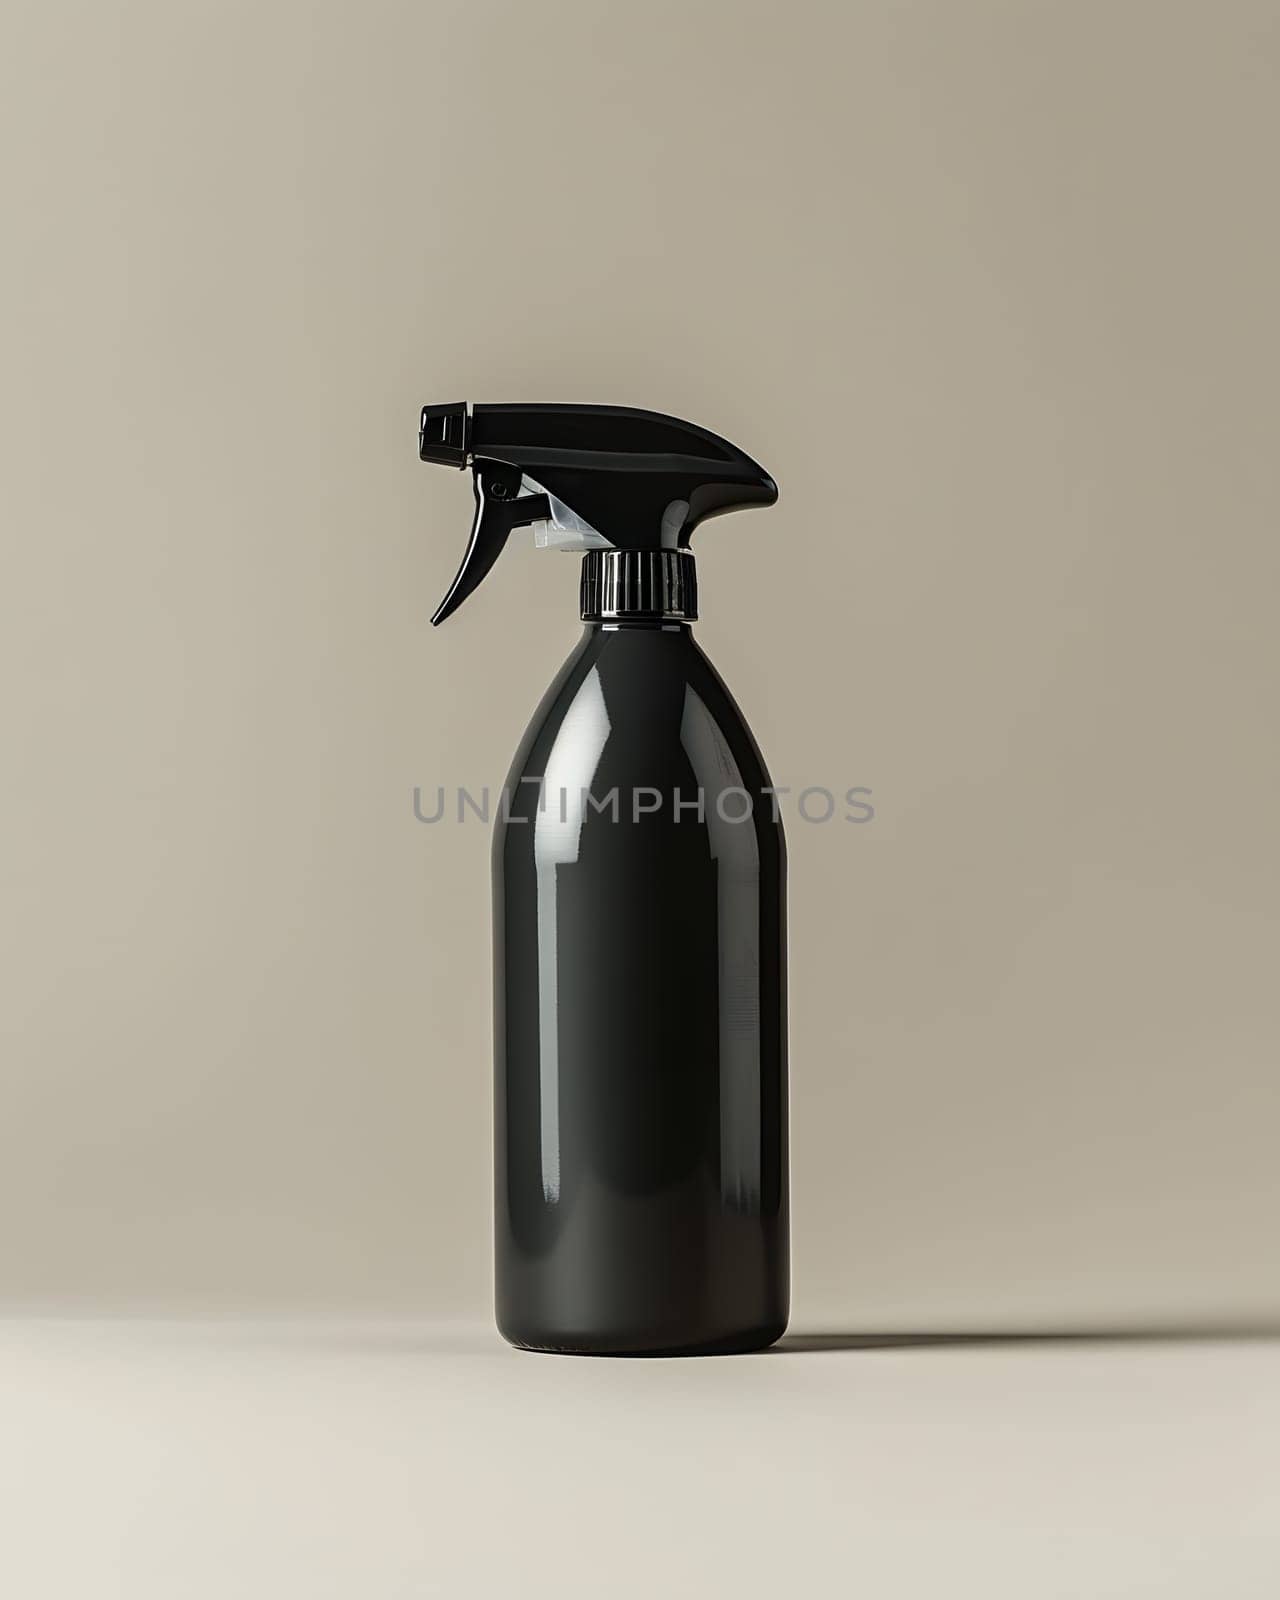 A black cylindrical spray bottle is placed on a beige rectangular surface, contrasting with the light background. The glass bottle contains liquid